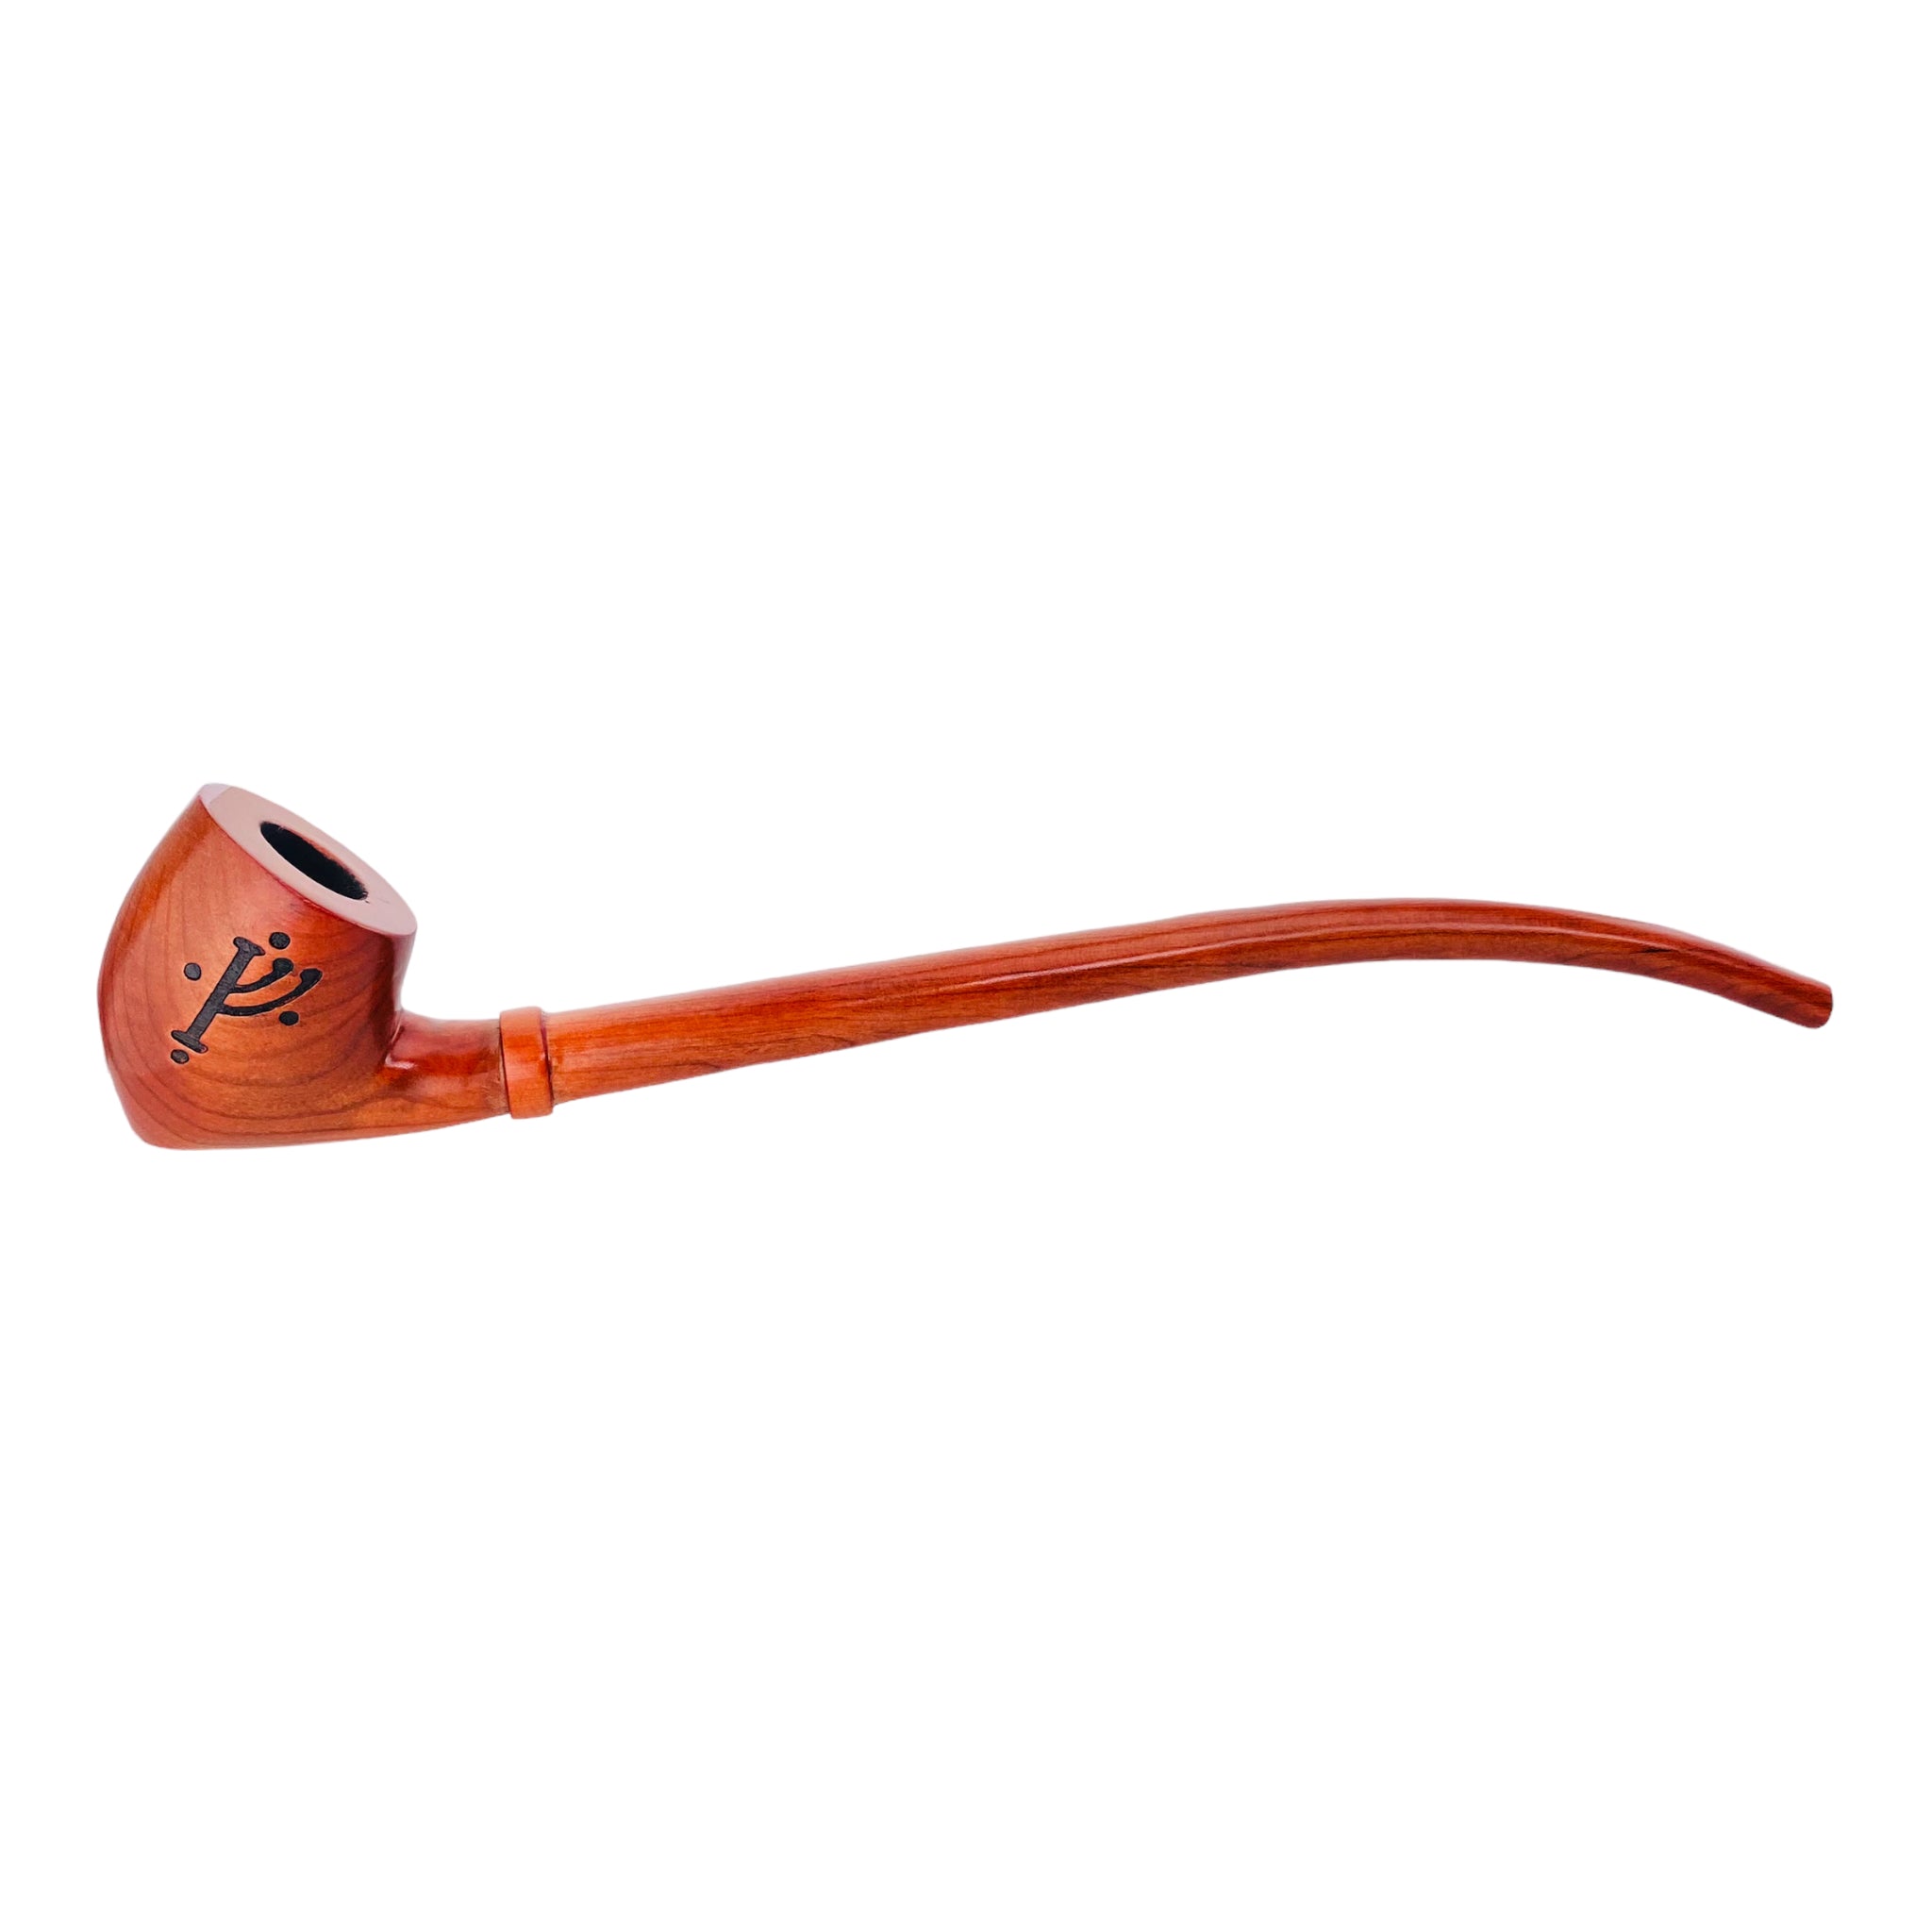 Shire Pipes - The Lord Of The Rings - Gandalf Smoking Pipe